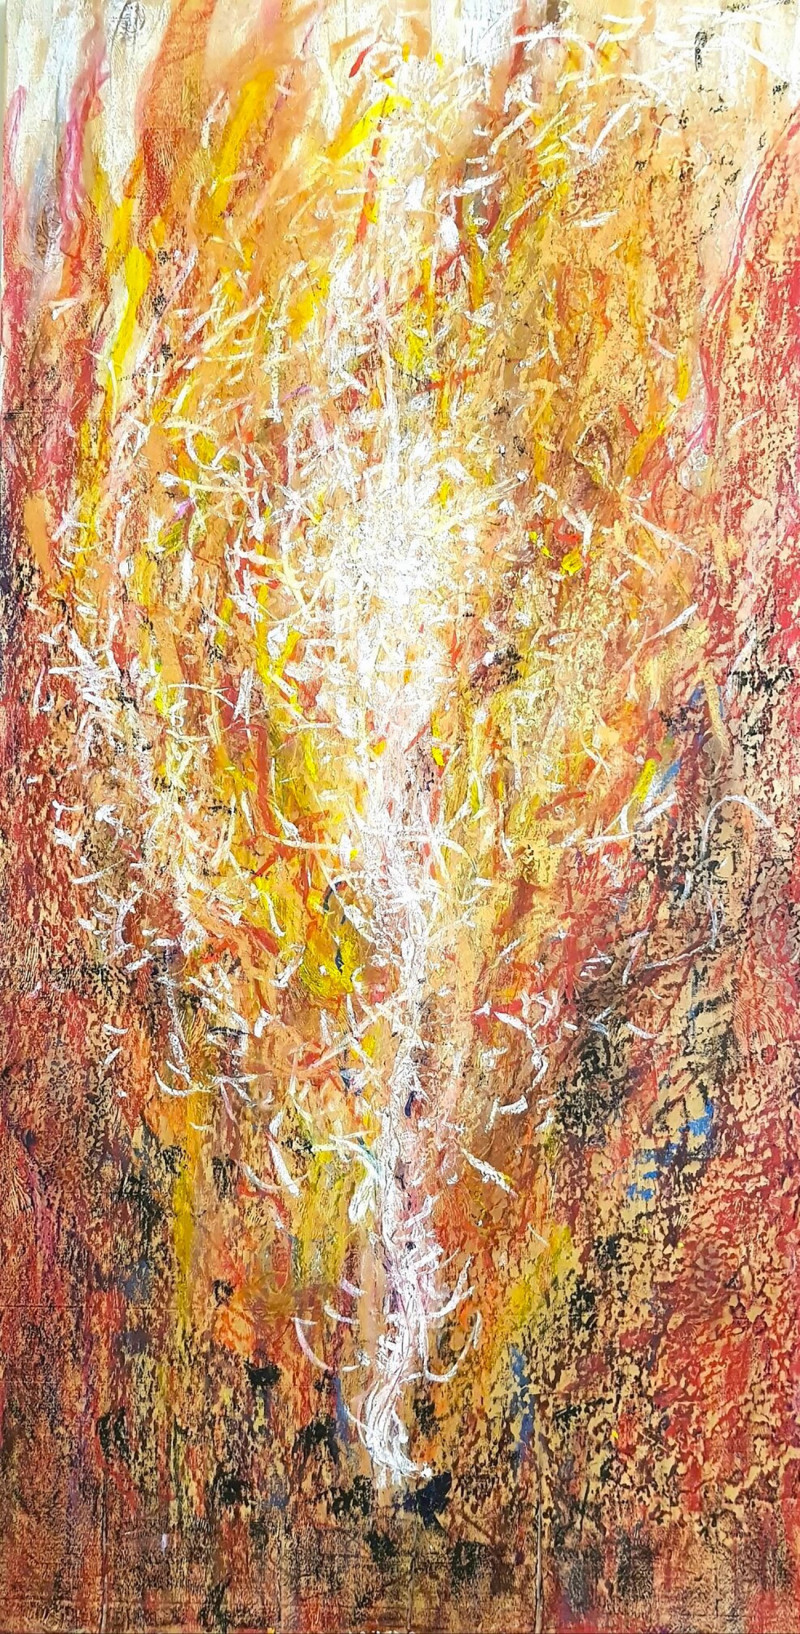 Sparkle of Light original painting by Daina Light. Abstract Paintings